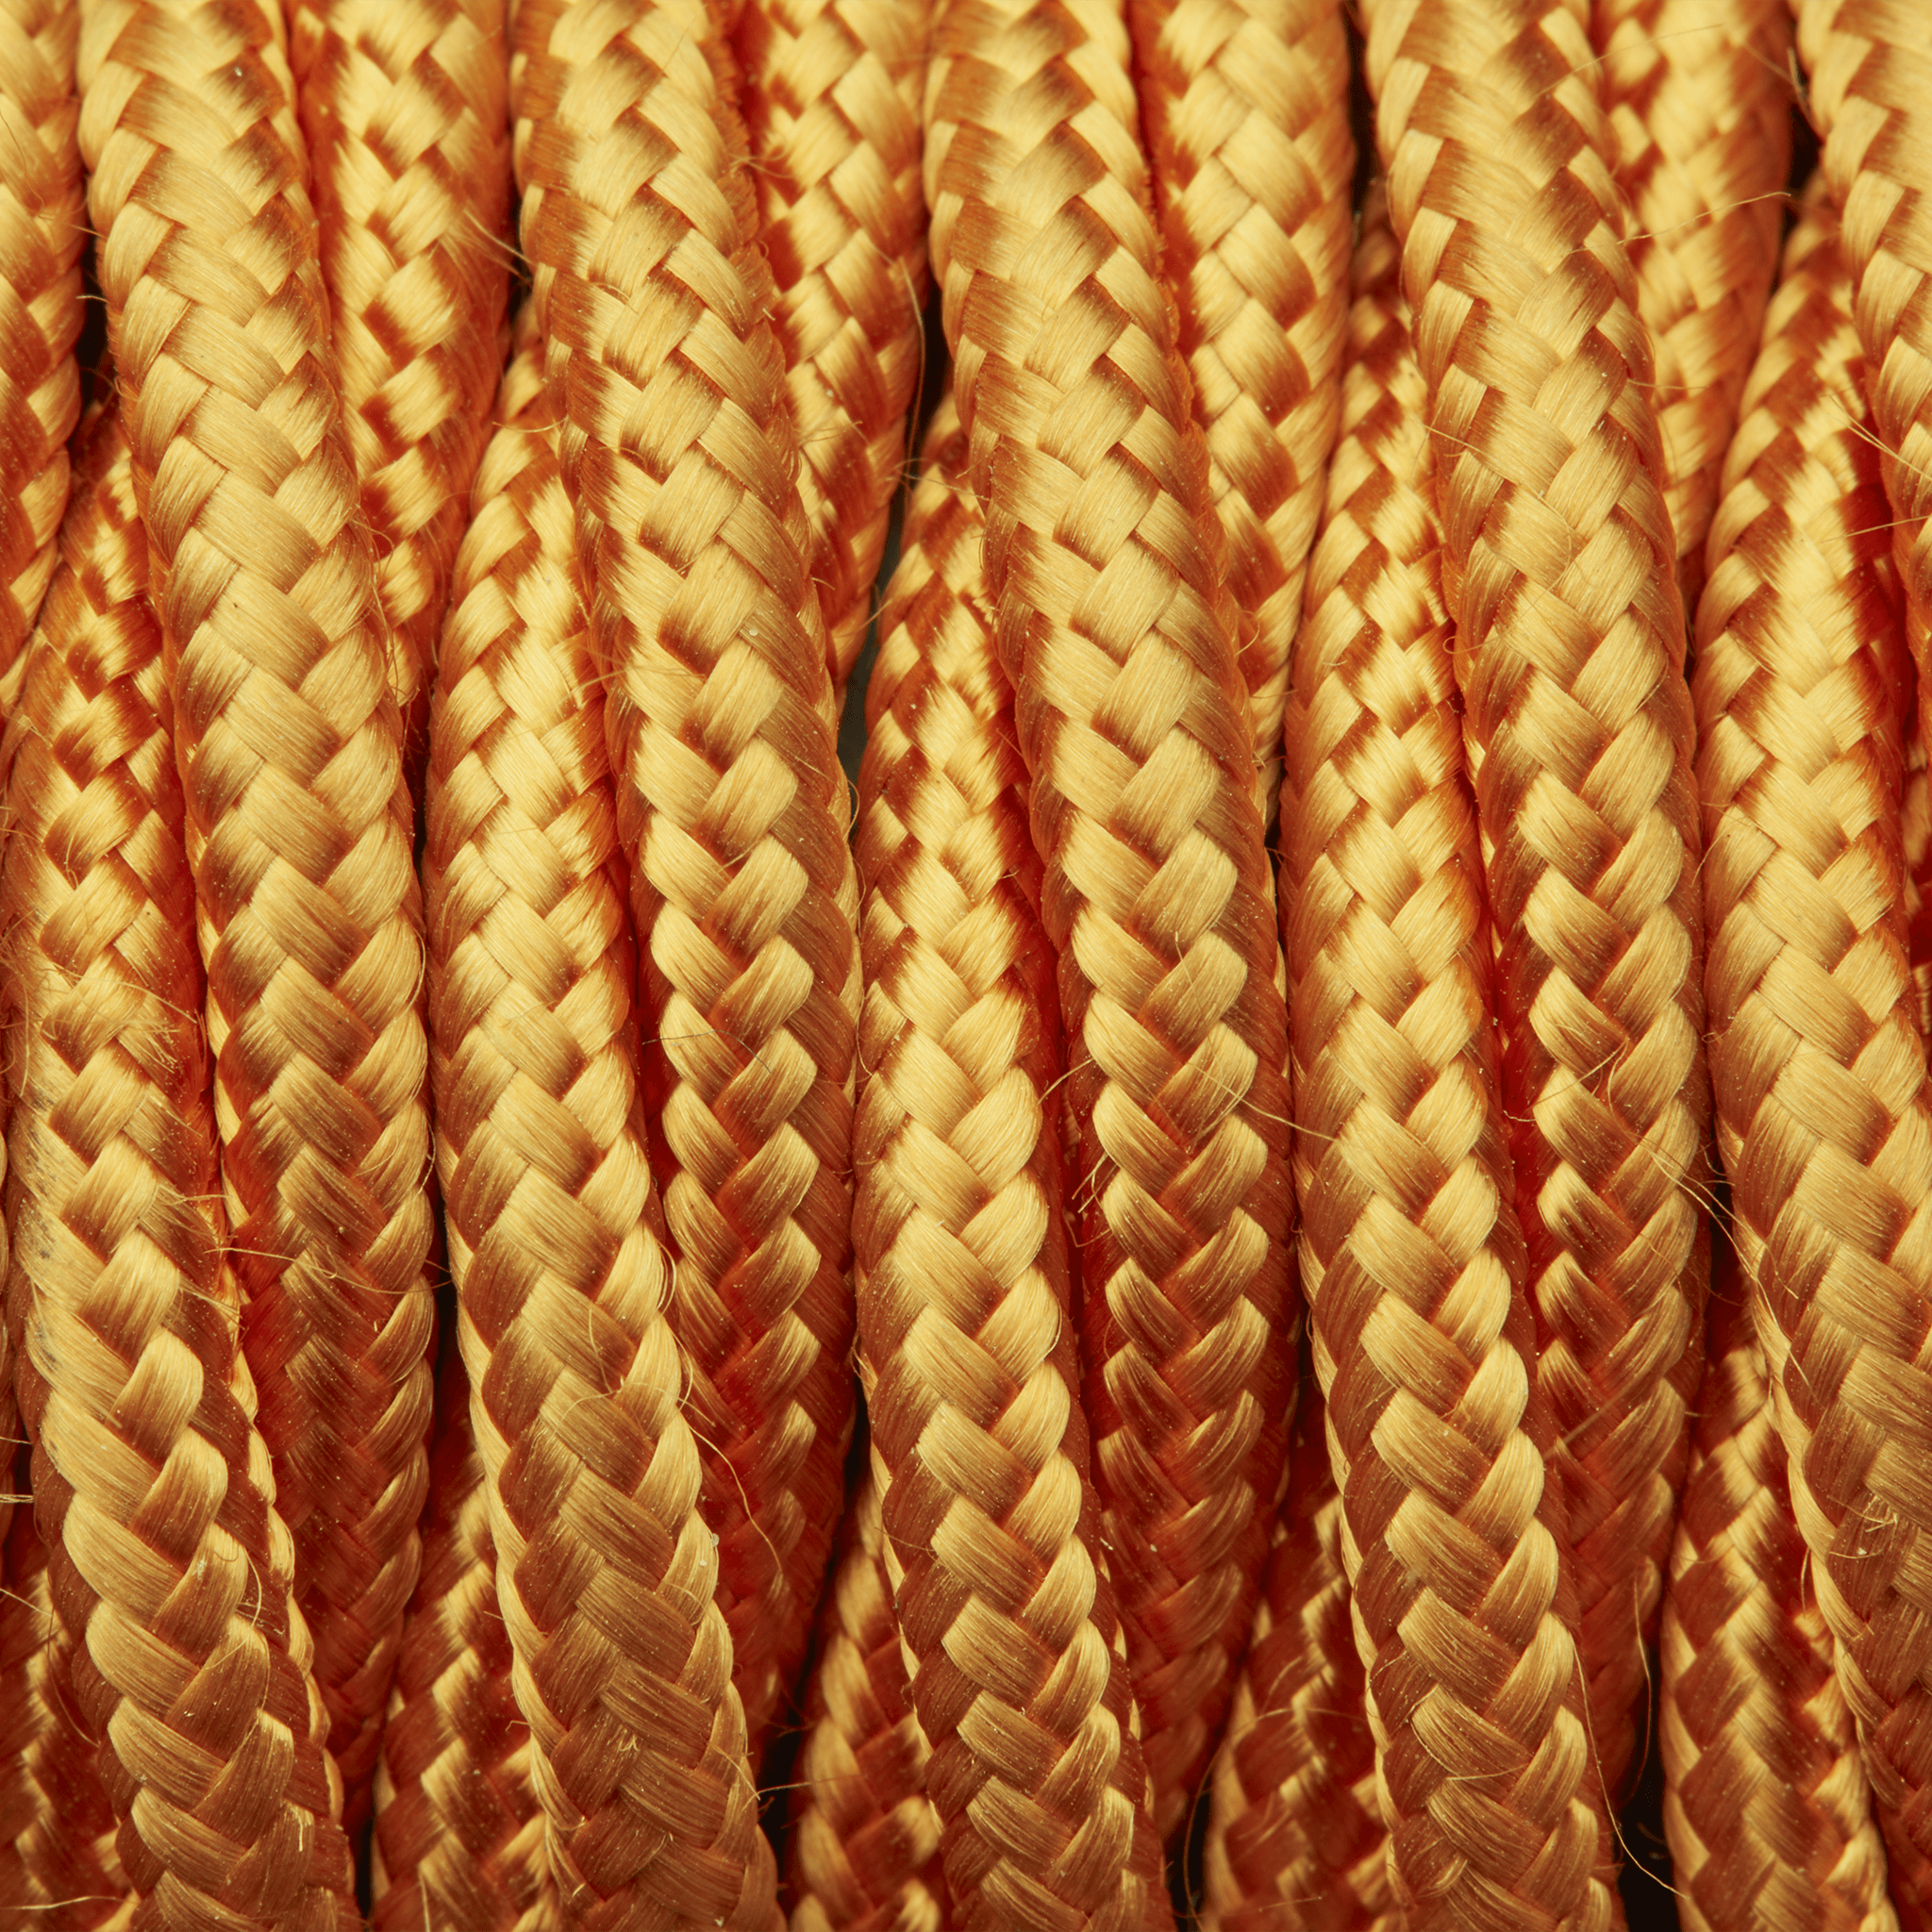 Industville – Twisted Fabric Flex – 3 Core Braided Cloth Cable Lighting Wire – Fabric Flex Cable – Gold Colour – Braided Woven Cloth Material – 100 CM